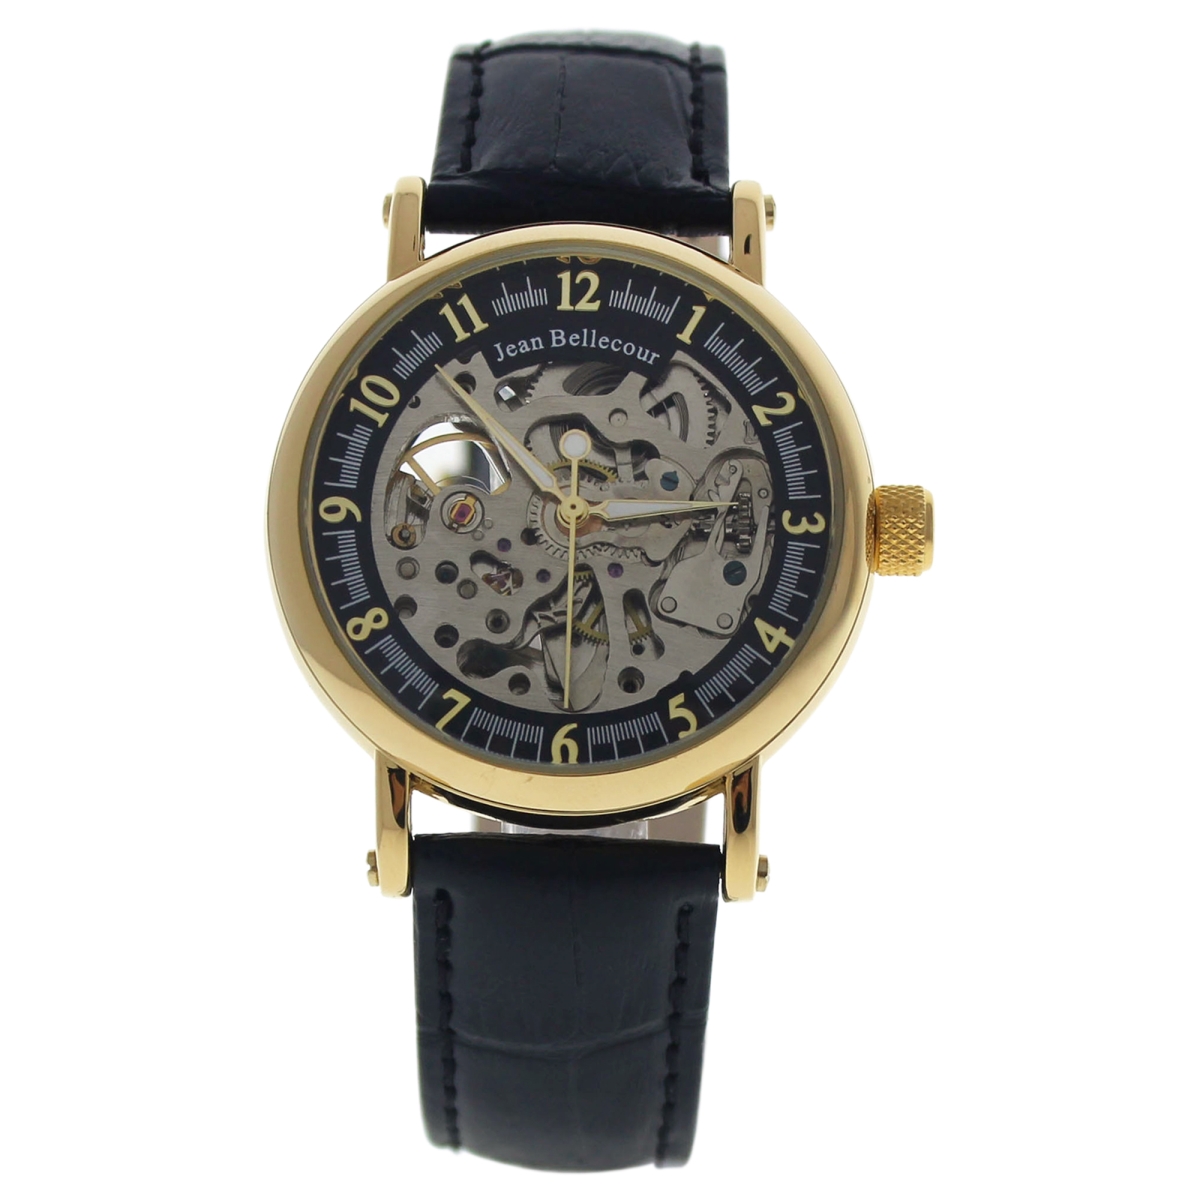 M-wat-1345 Gold & Black Leather Strap Watch For Men - Reds27